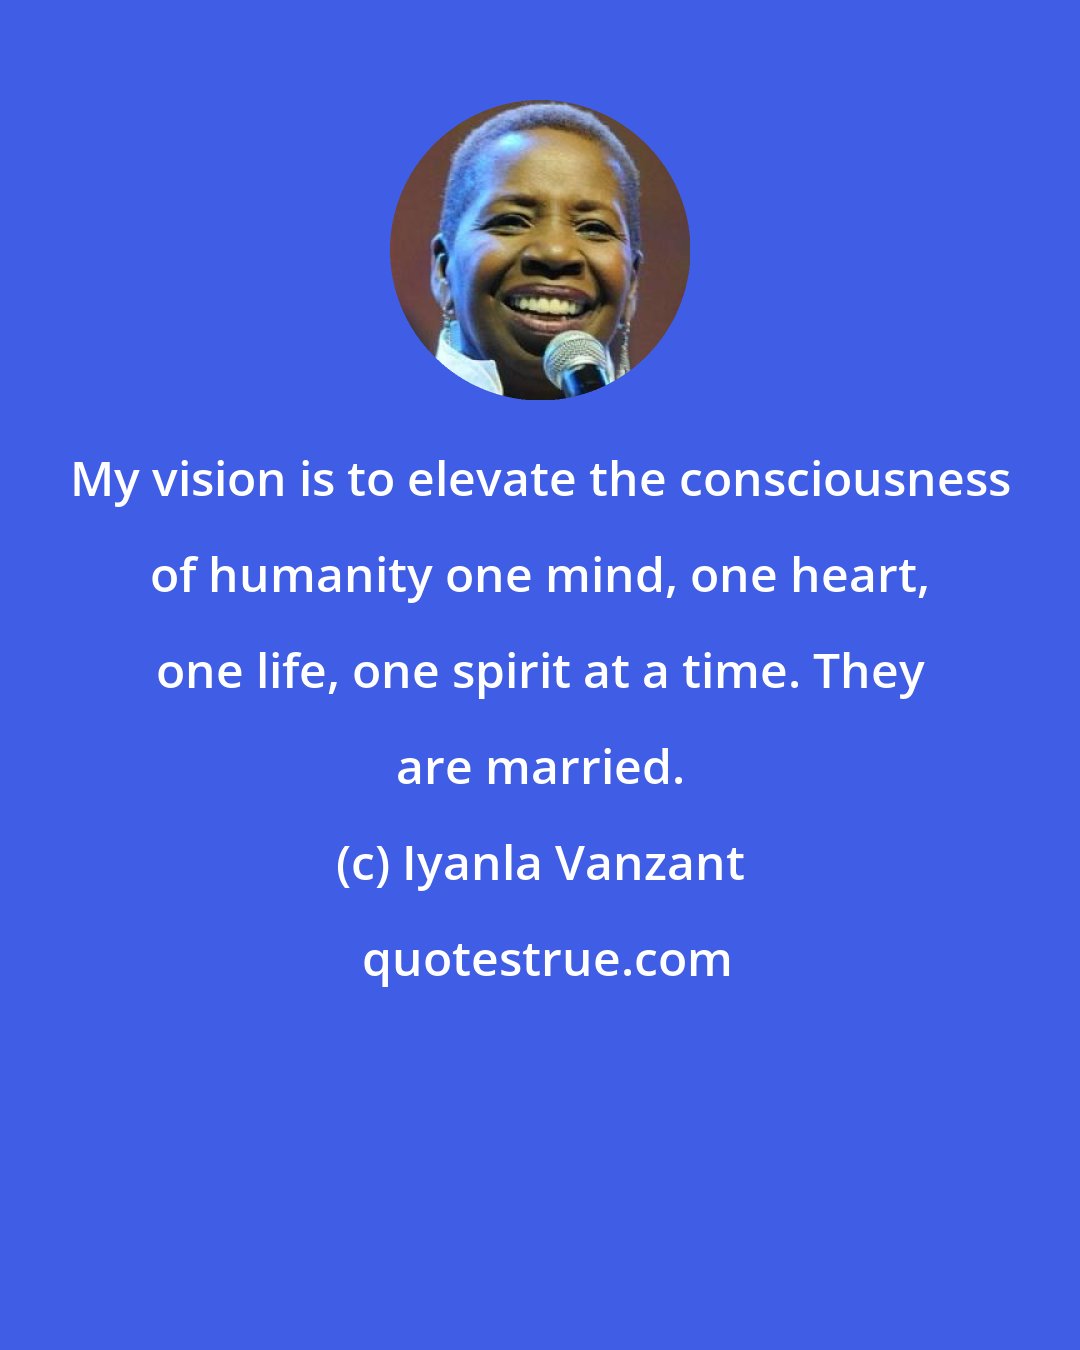 Iyanla Vanzant: My vision is to elevate the consciousness of humanity one mind, one heart, one life, one spirit at a time. They are married.